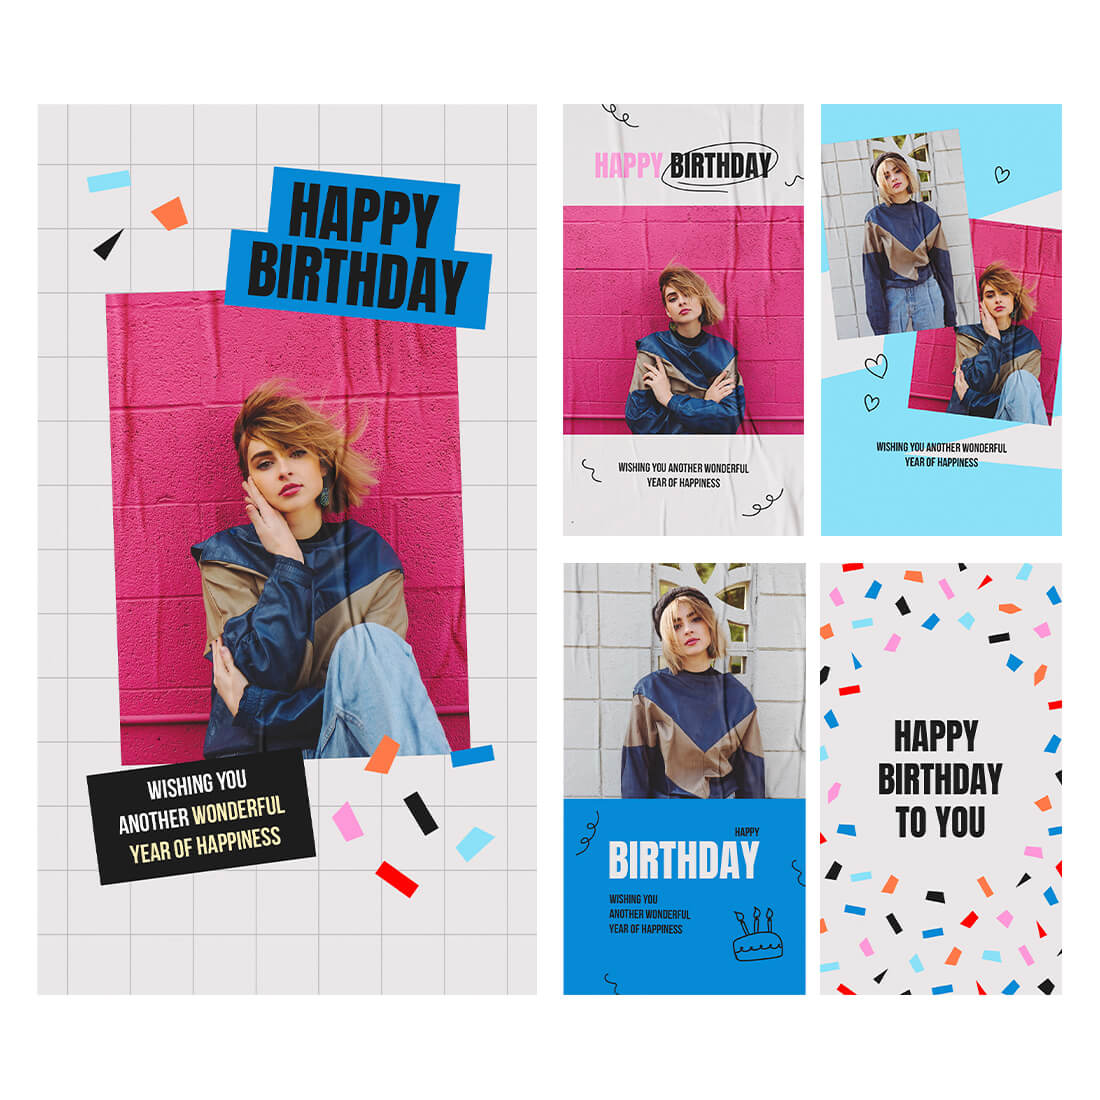 Bright Happy Birthday Instagram Story Template cover image.